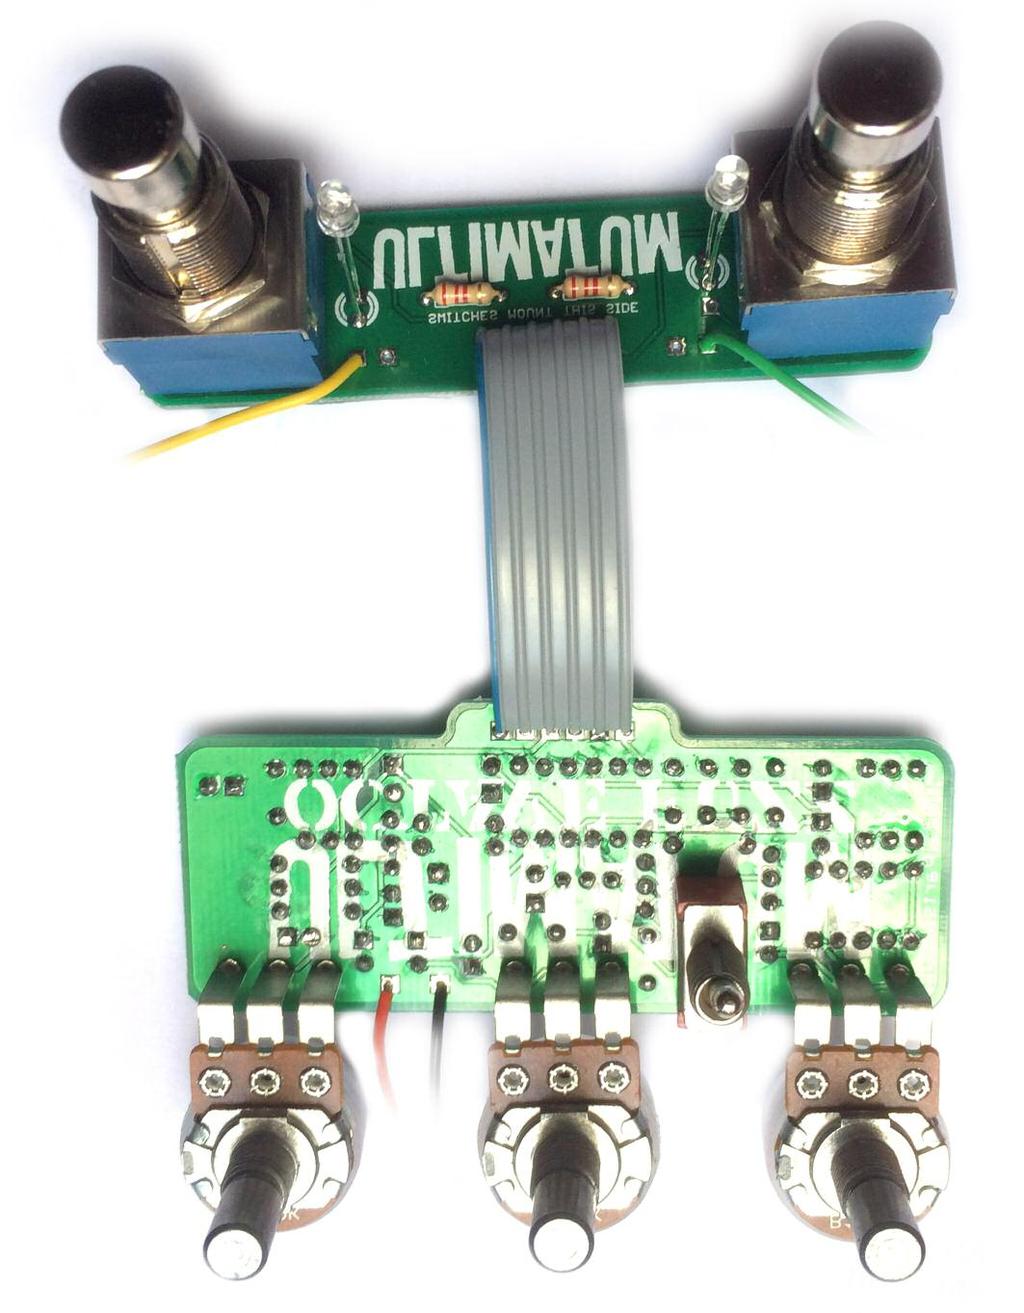 Now you need to join the two boards together. You have a nice 6-way ribbon cable, right? If not, just run six lengths of wire between the two boards.